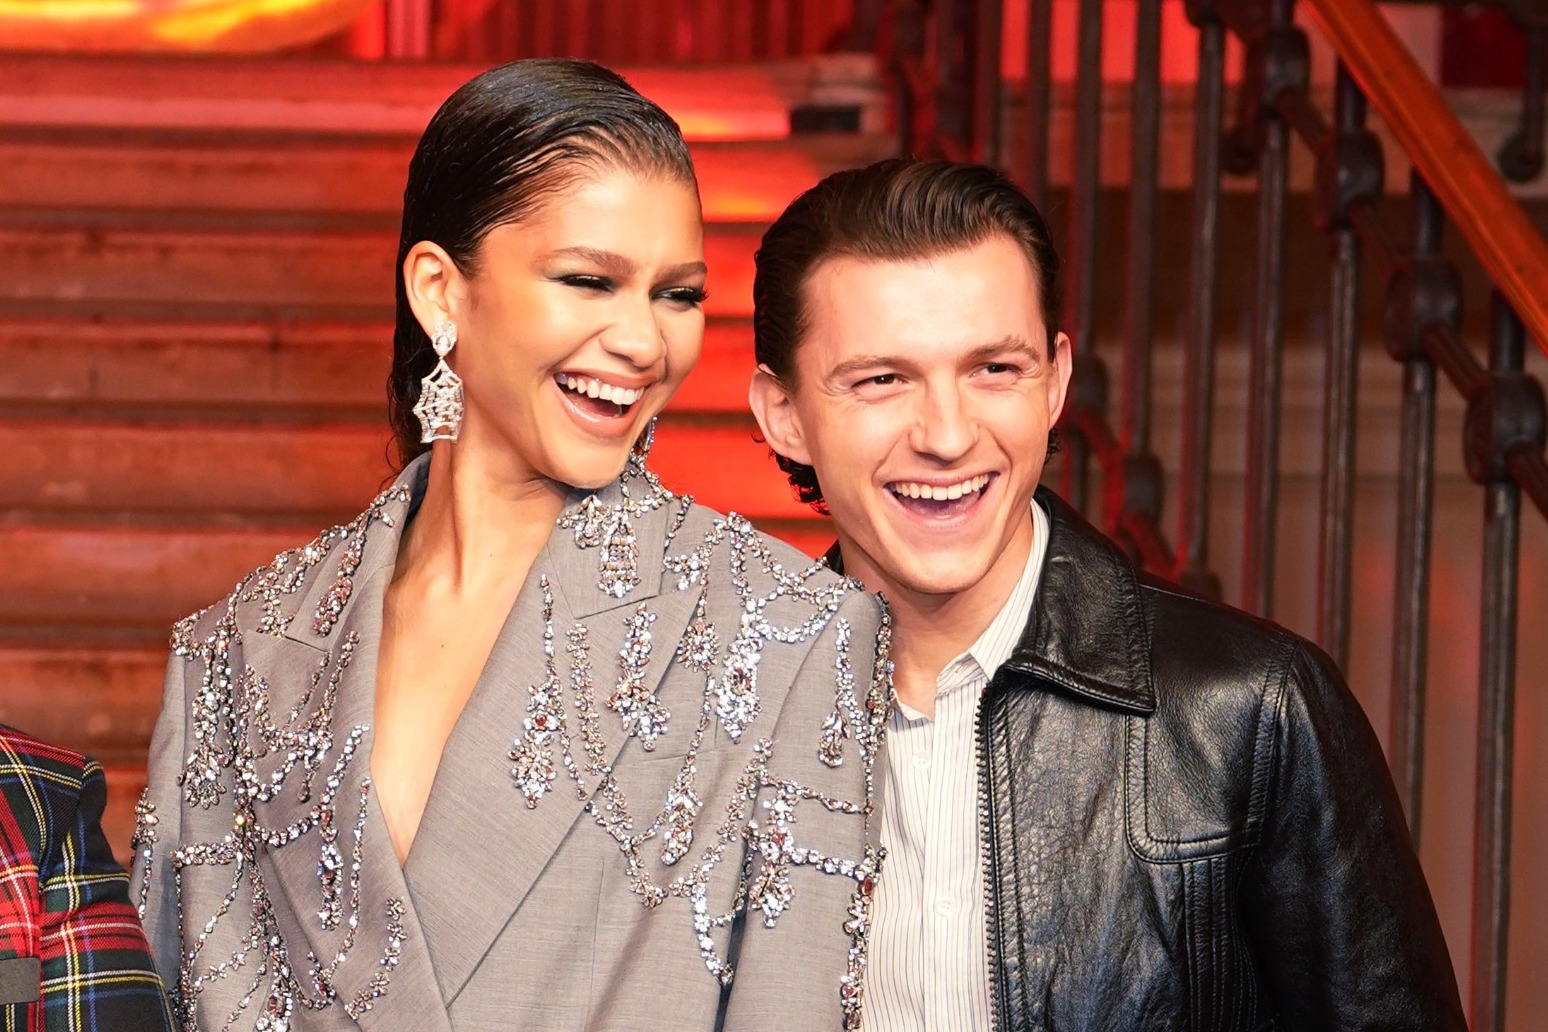 Zendaya calls Tom Holland ‘the one who makes me the happiest’ in birthday post 